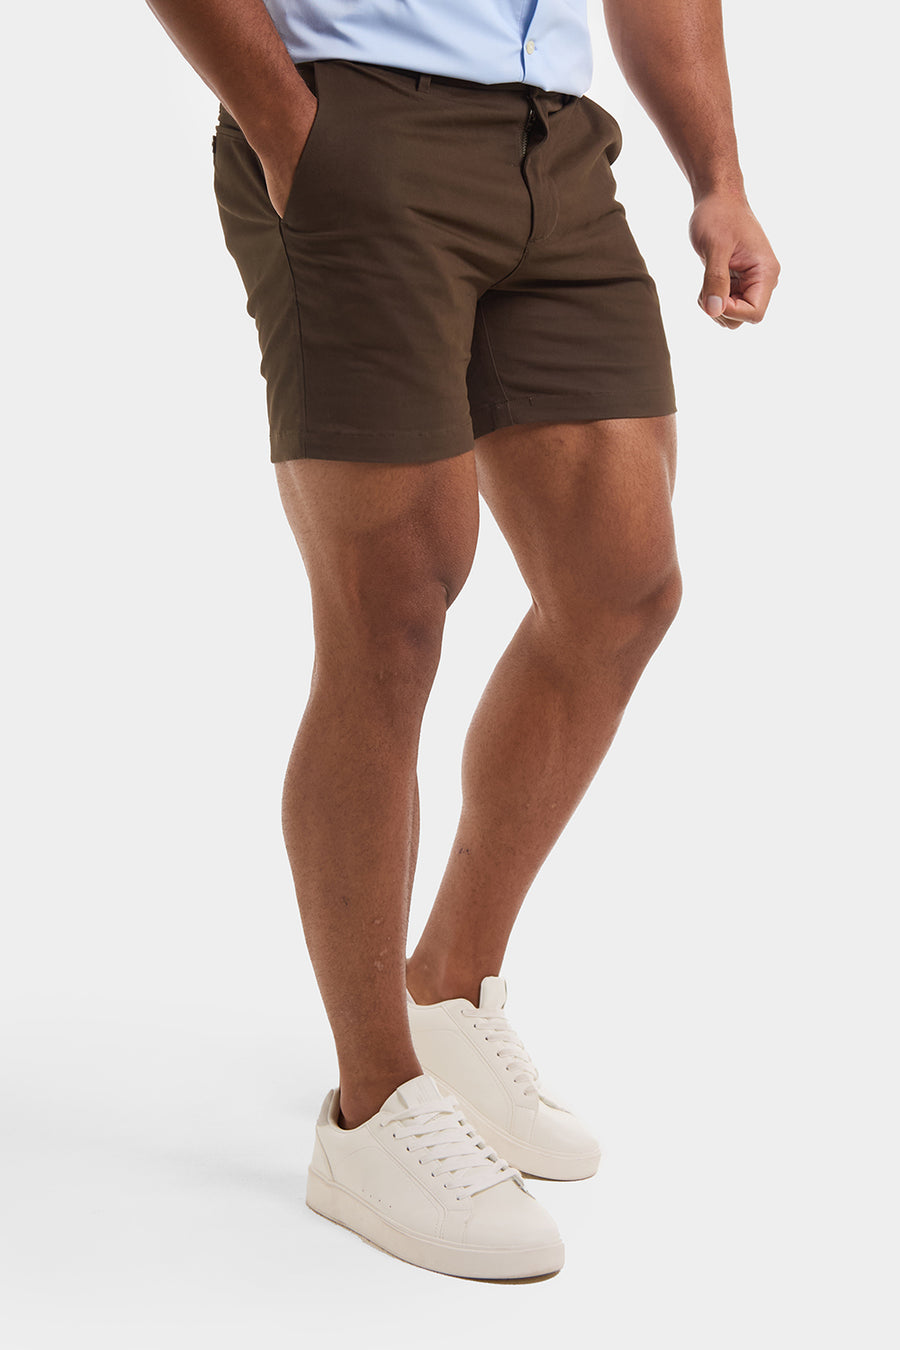 Athletic Fit Chino Shorts 5" in Khaki - TAILORED ATHLETE - USA